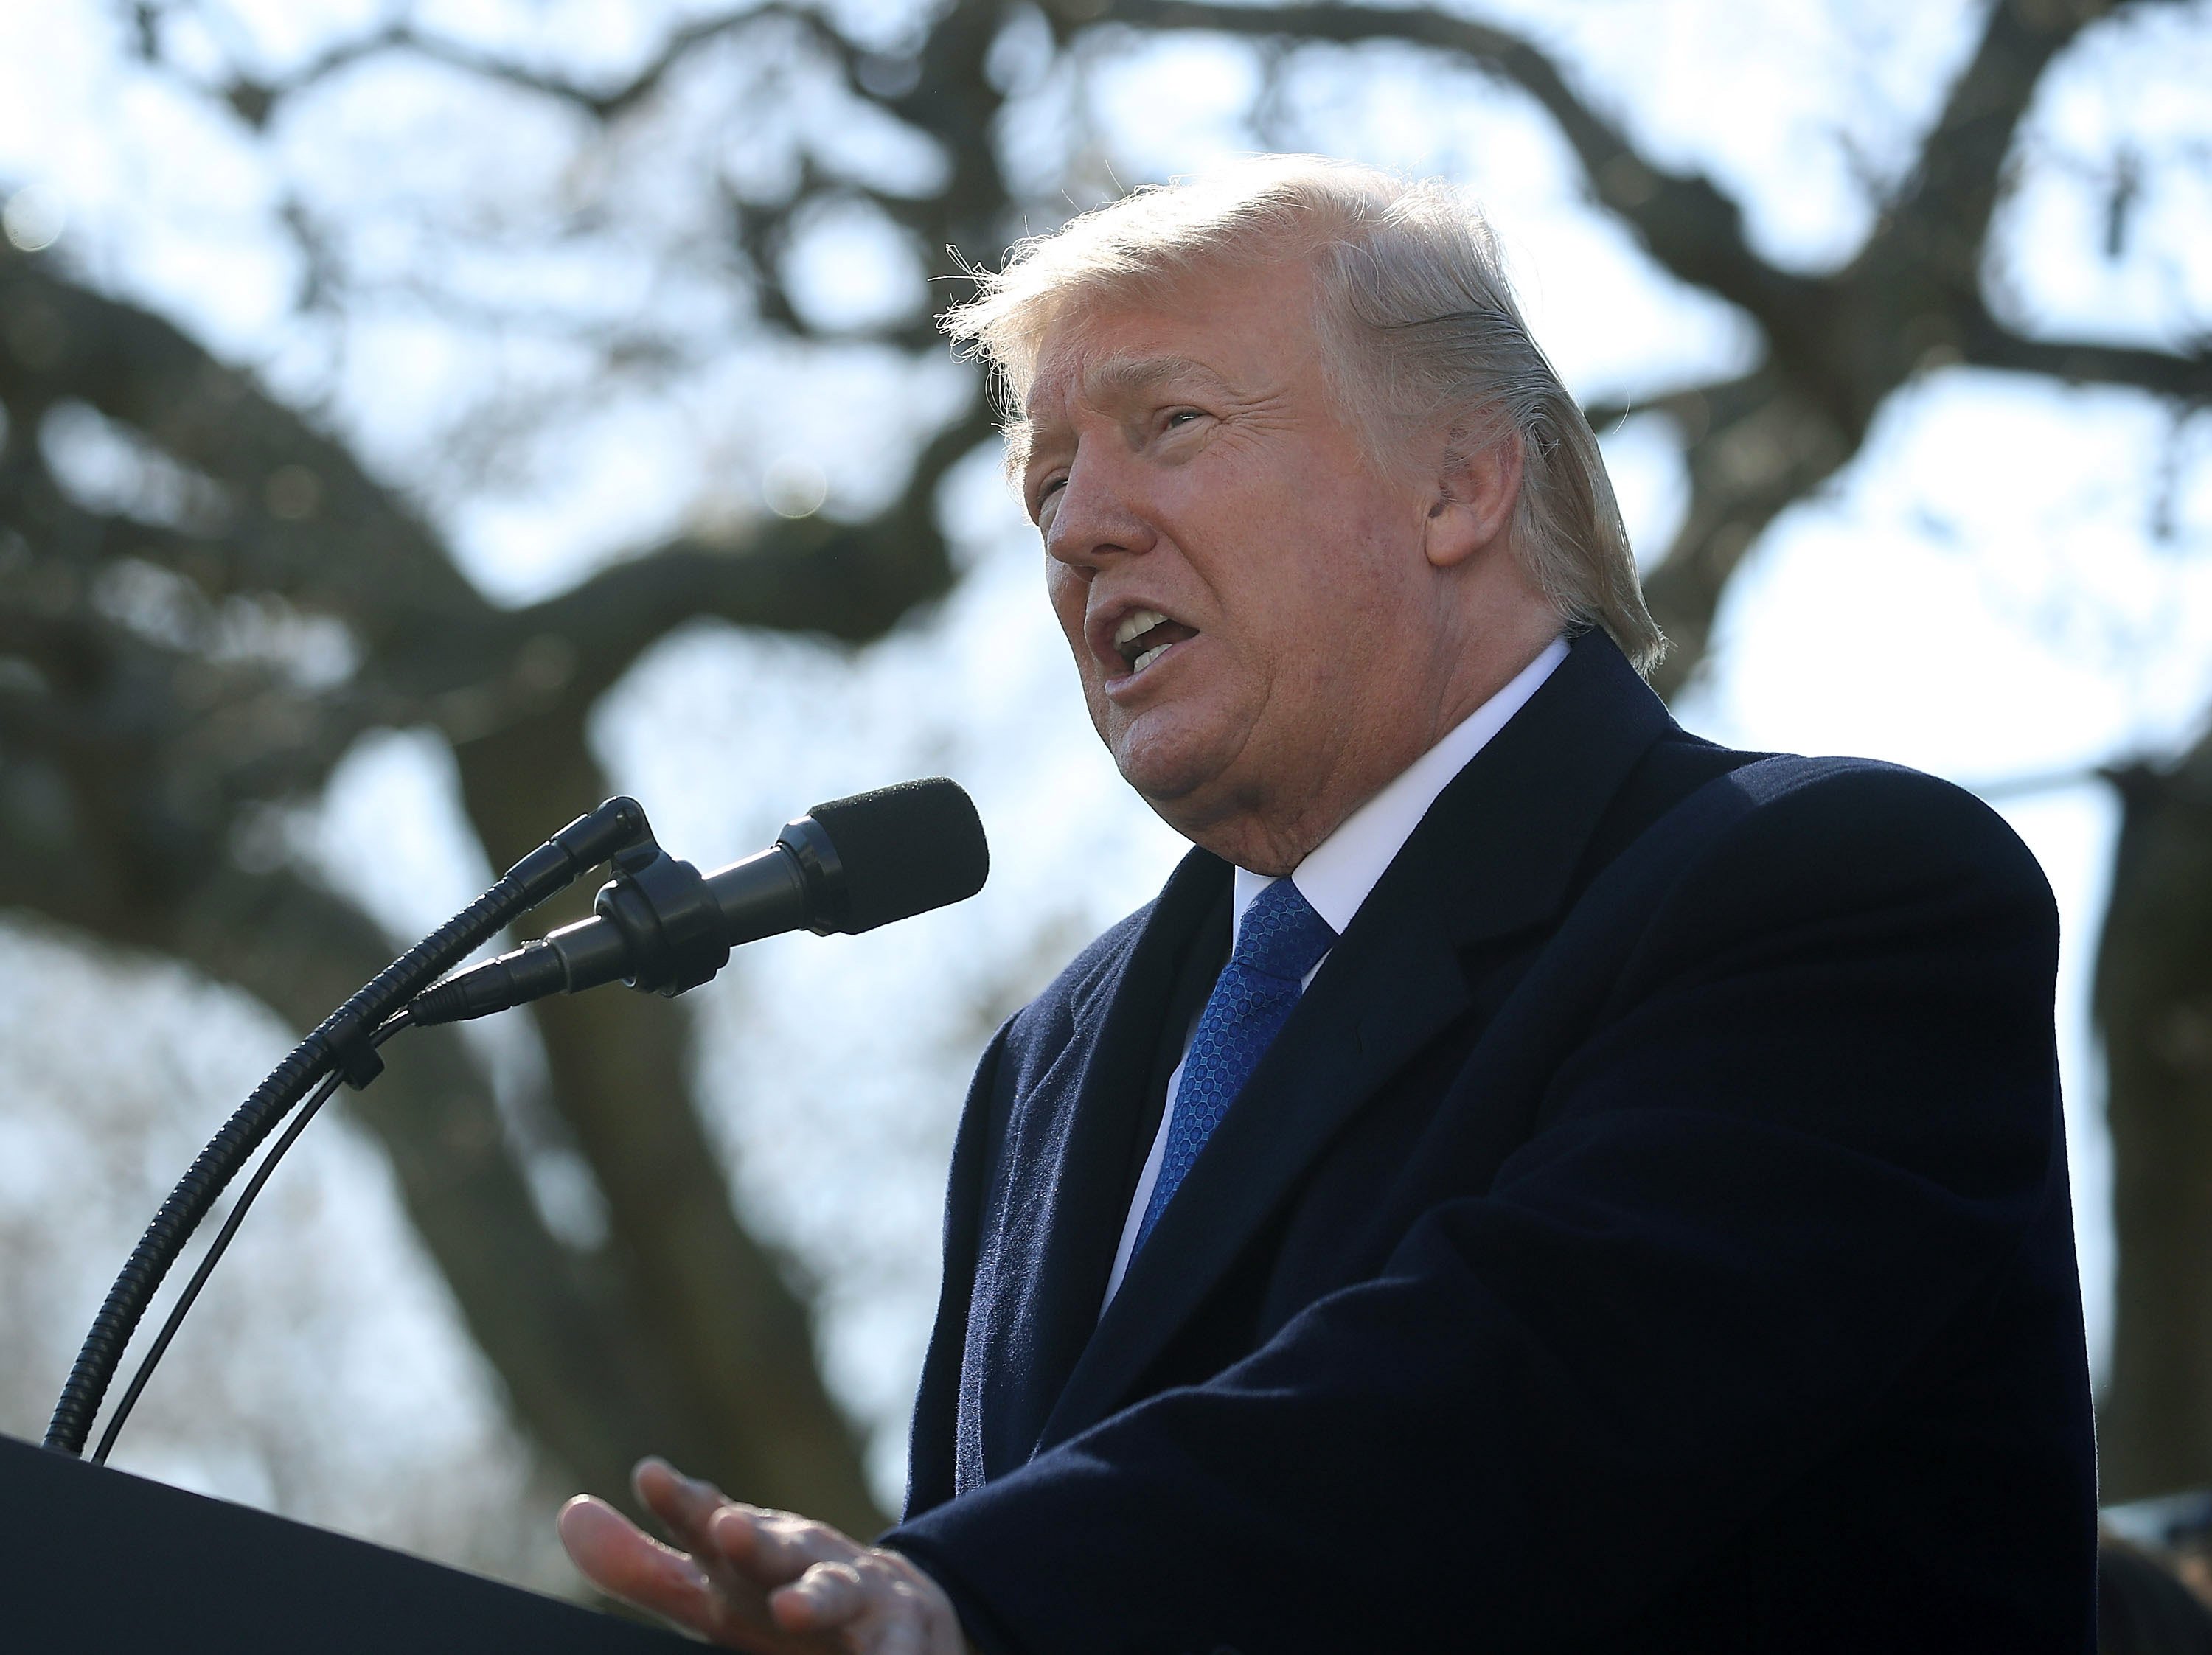 WASHINGTON, DC - JANUARY 19: U.S. President Donald Trump speaks to March for Life participants and pro-life leaders in the Rose Garden at the White House on January 19, 2018 in Washington, DC. The annual march takes place around the anniversary of Roe v. Wade, Supreme Court decision that came on January 22, 1974. (Photo by Mark Wilson/Getty Images)